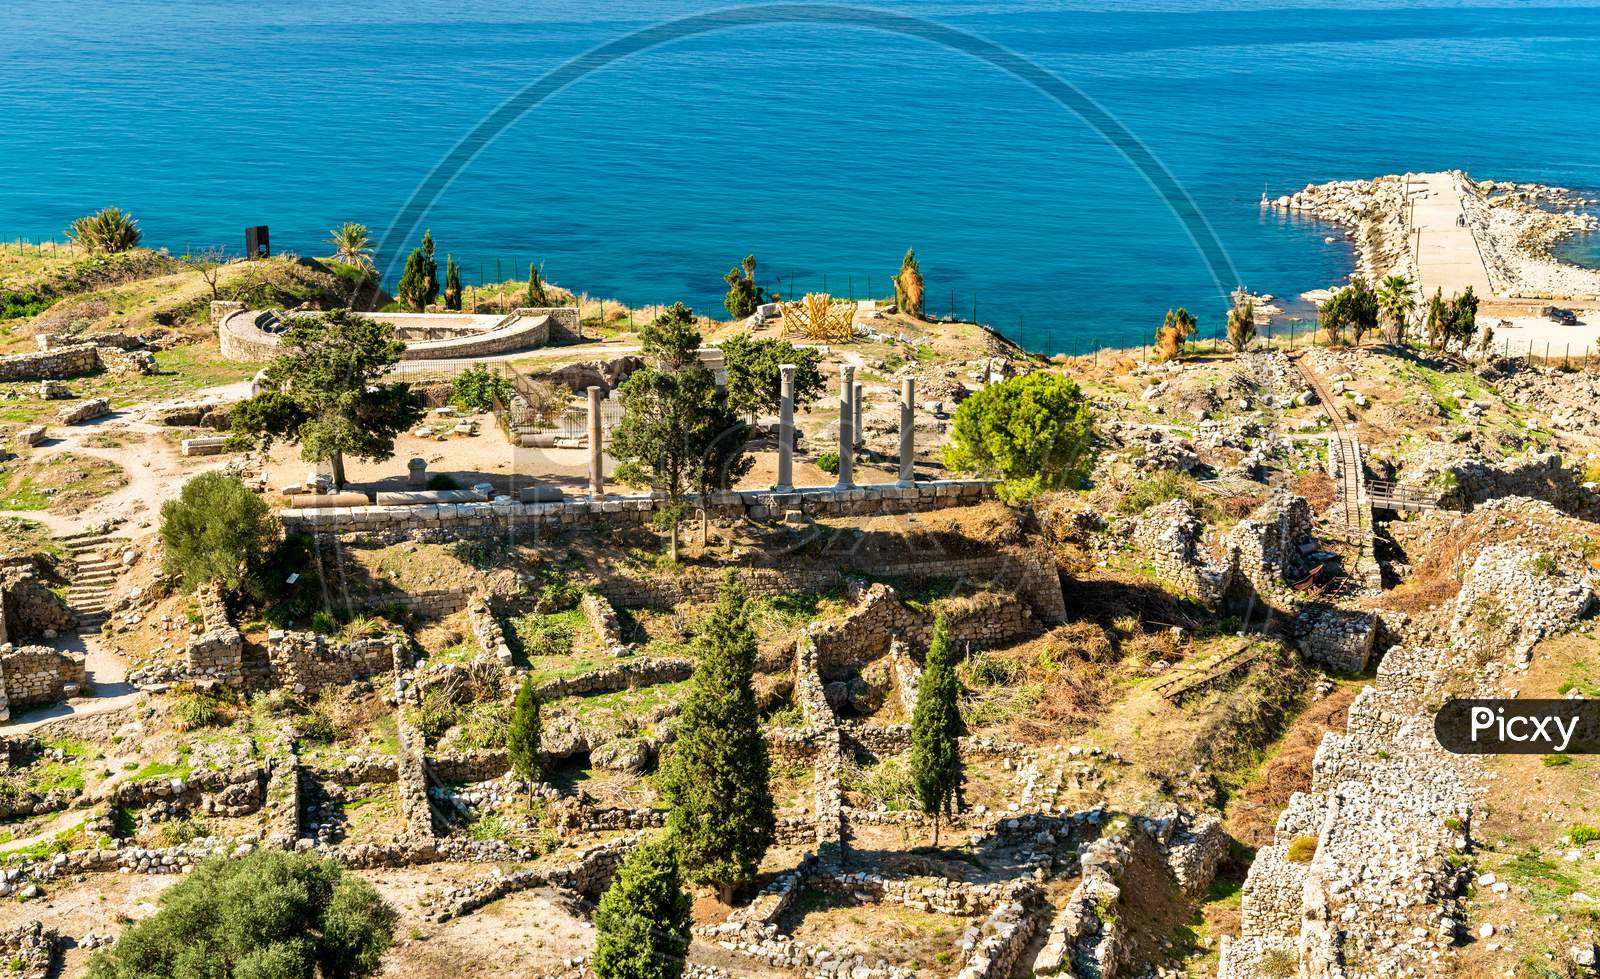 Ruins Of Byblos In Lebanon, A Unesco World Heritage Site